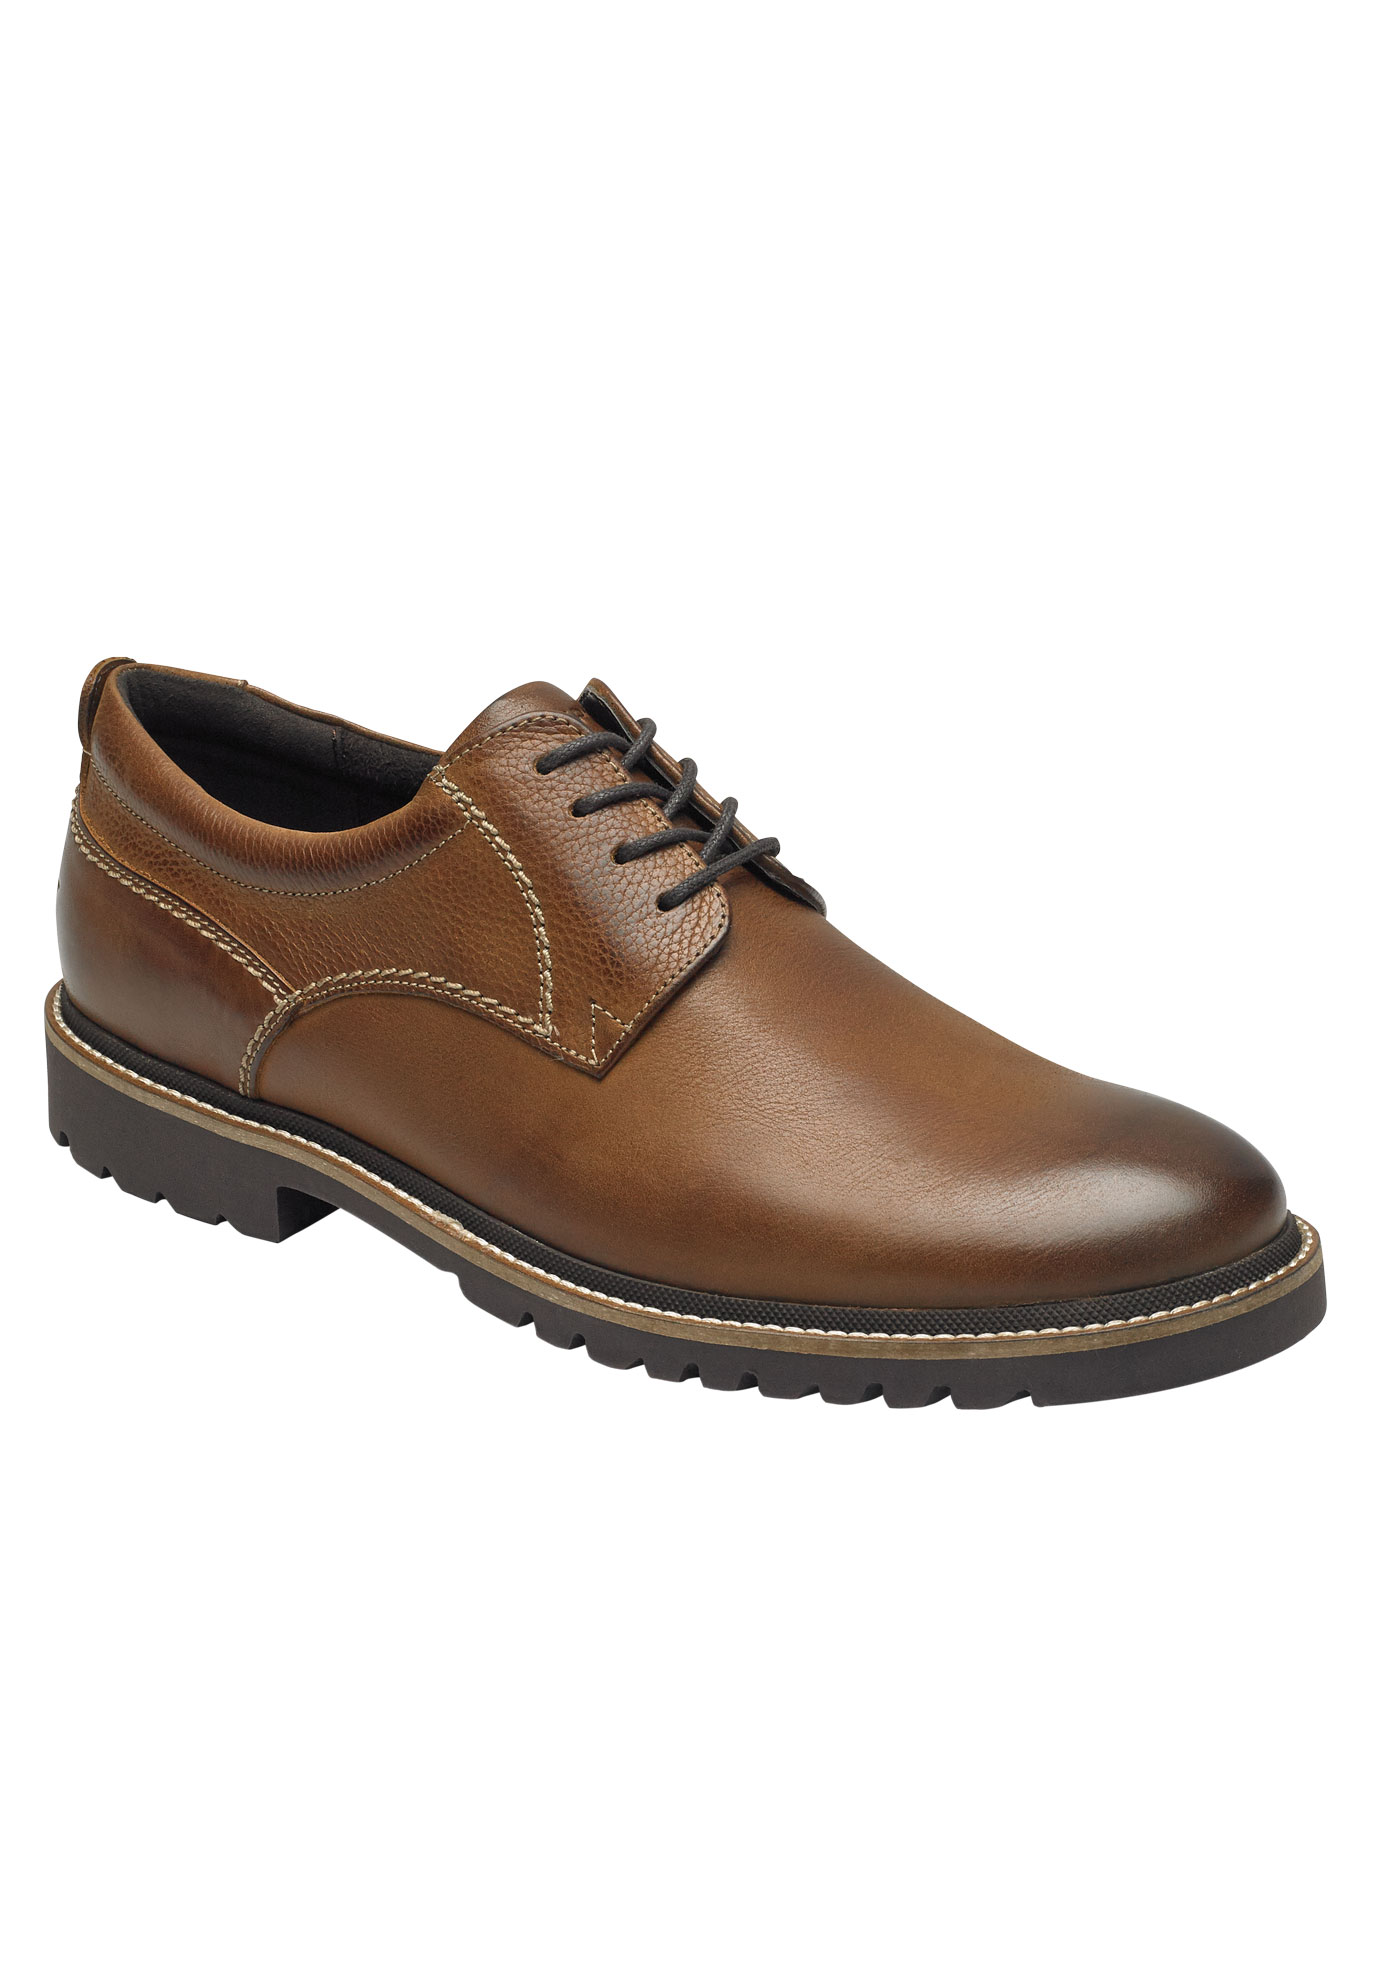 Rockport® Marshall Plain Toe Oxfords| Big and Tall Shoes | Full Beauty